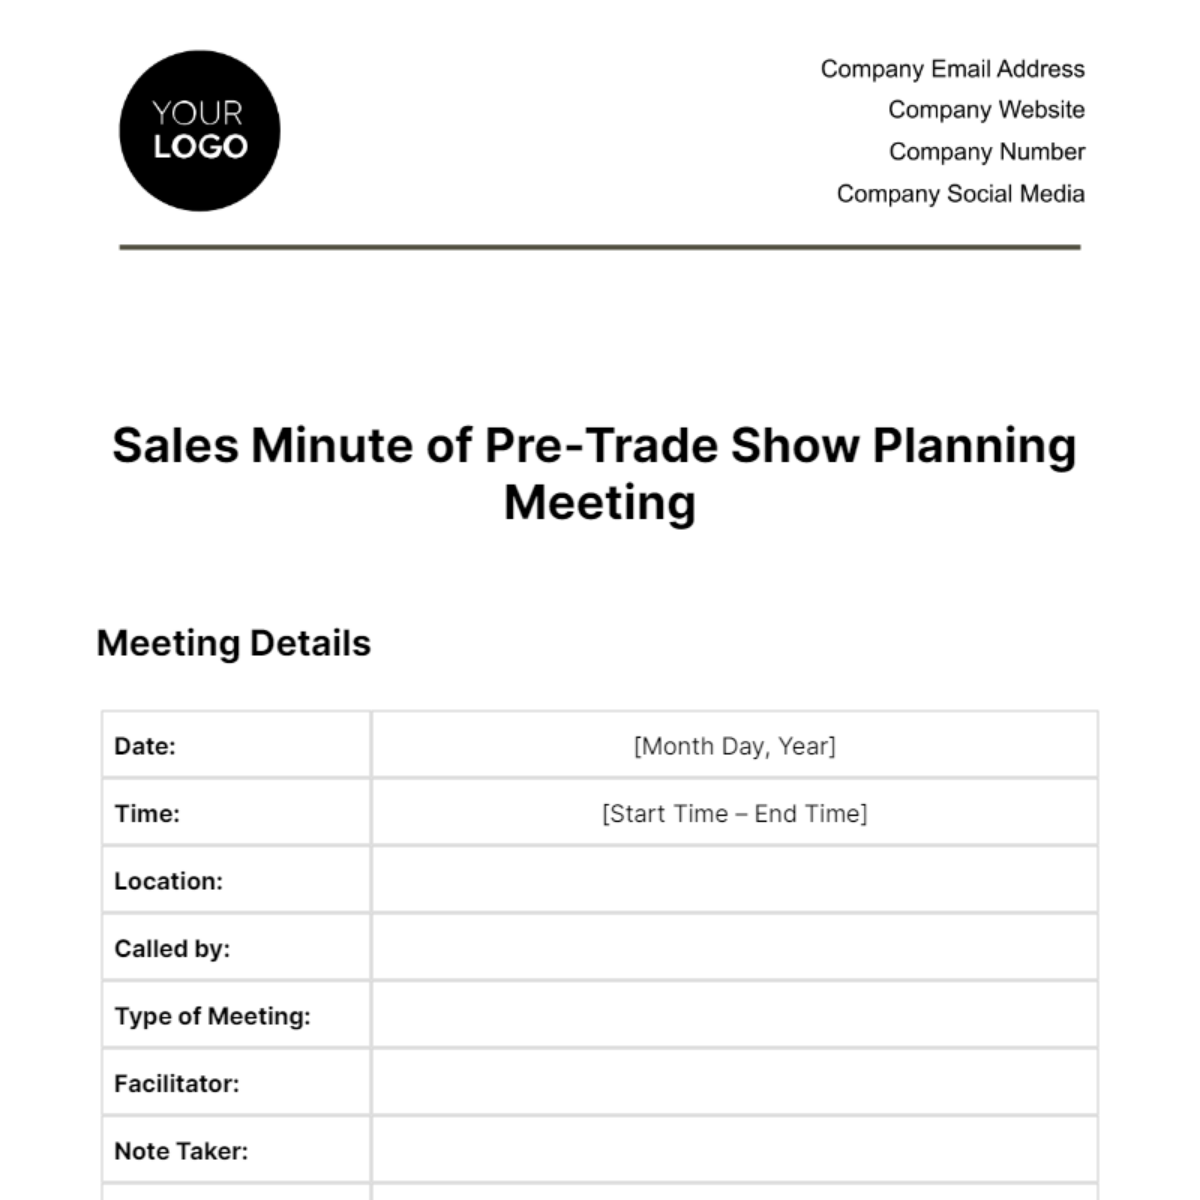 Free Sales Minute of Pre-Trade Show Planning Meeting Template